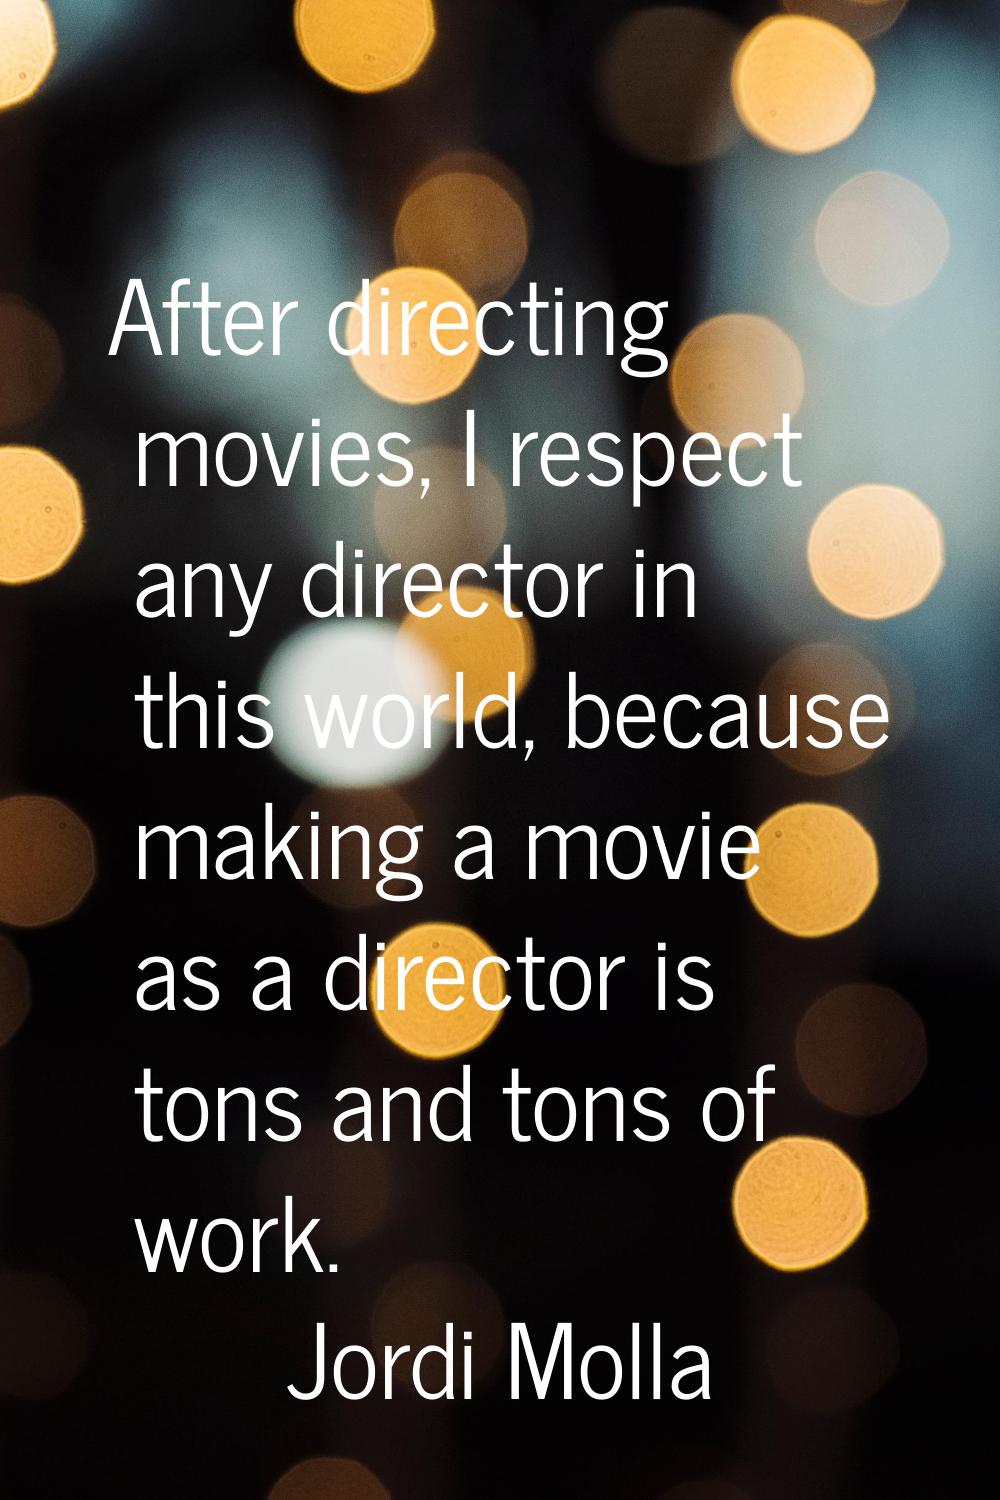 After directing movies, I respect any director in this world, because making a movie as a director 